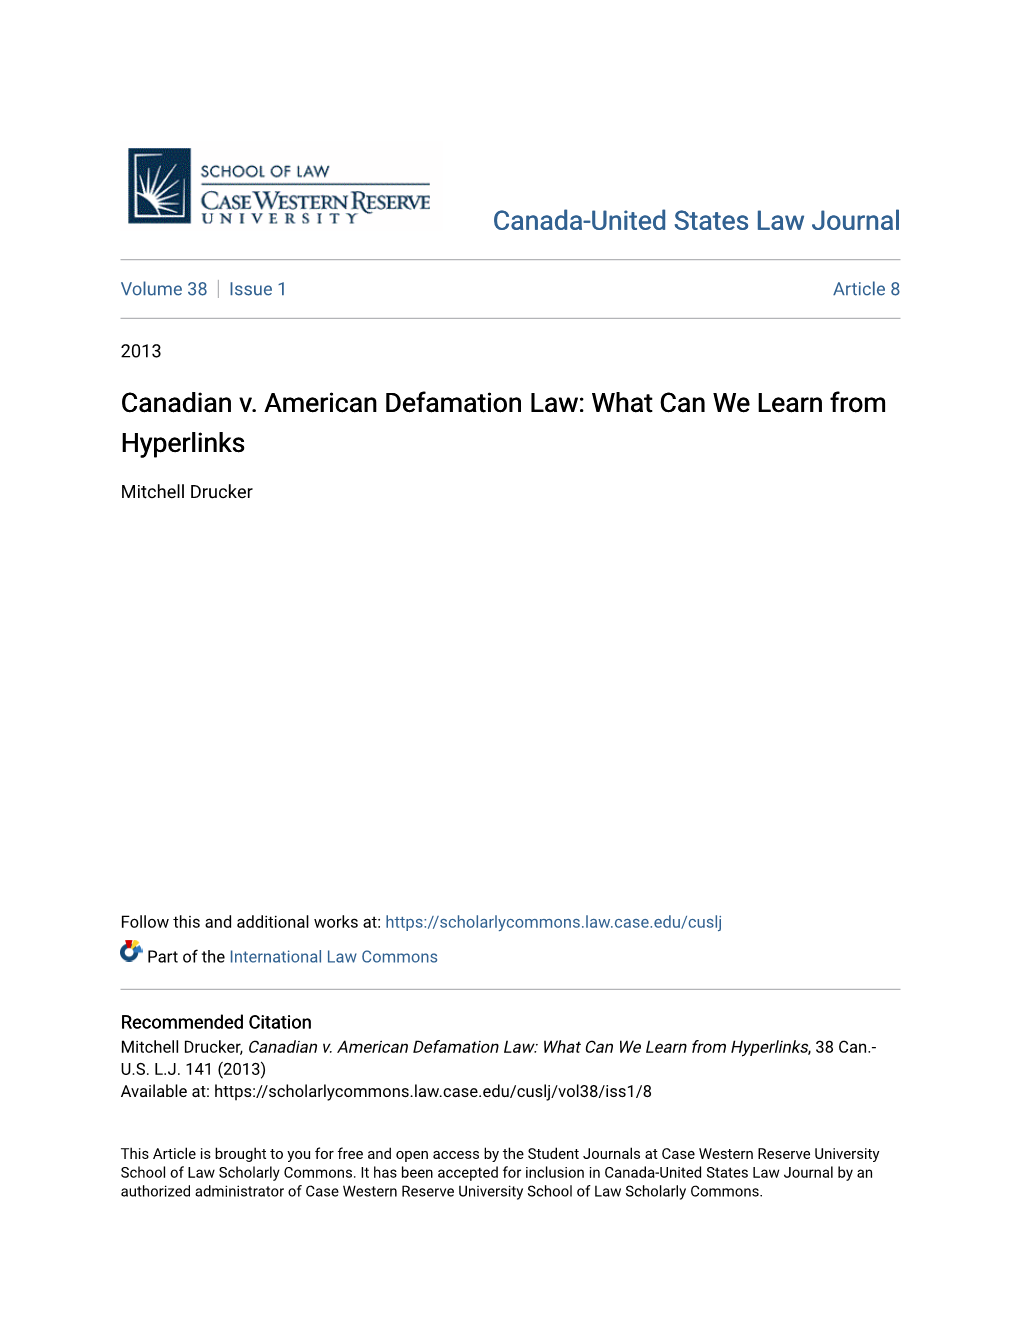 Canadian V. American Defamation Law: What Can We Learn from Hyperlinks